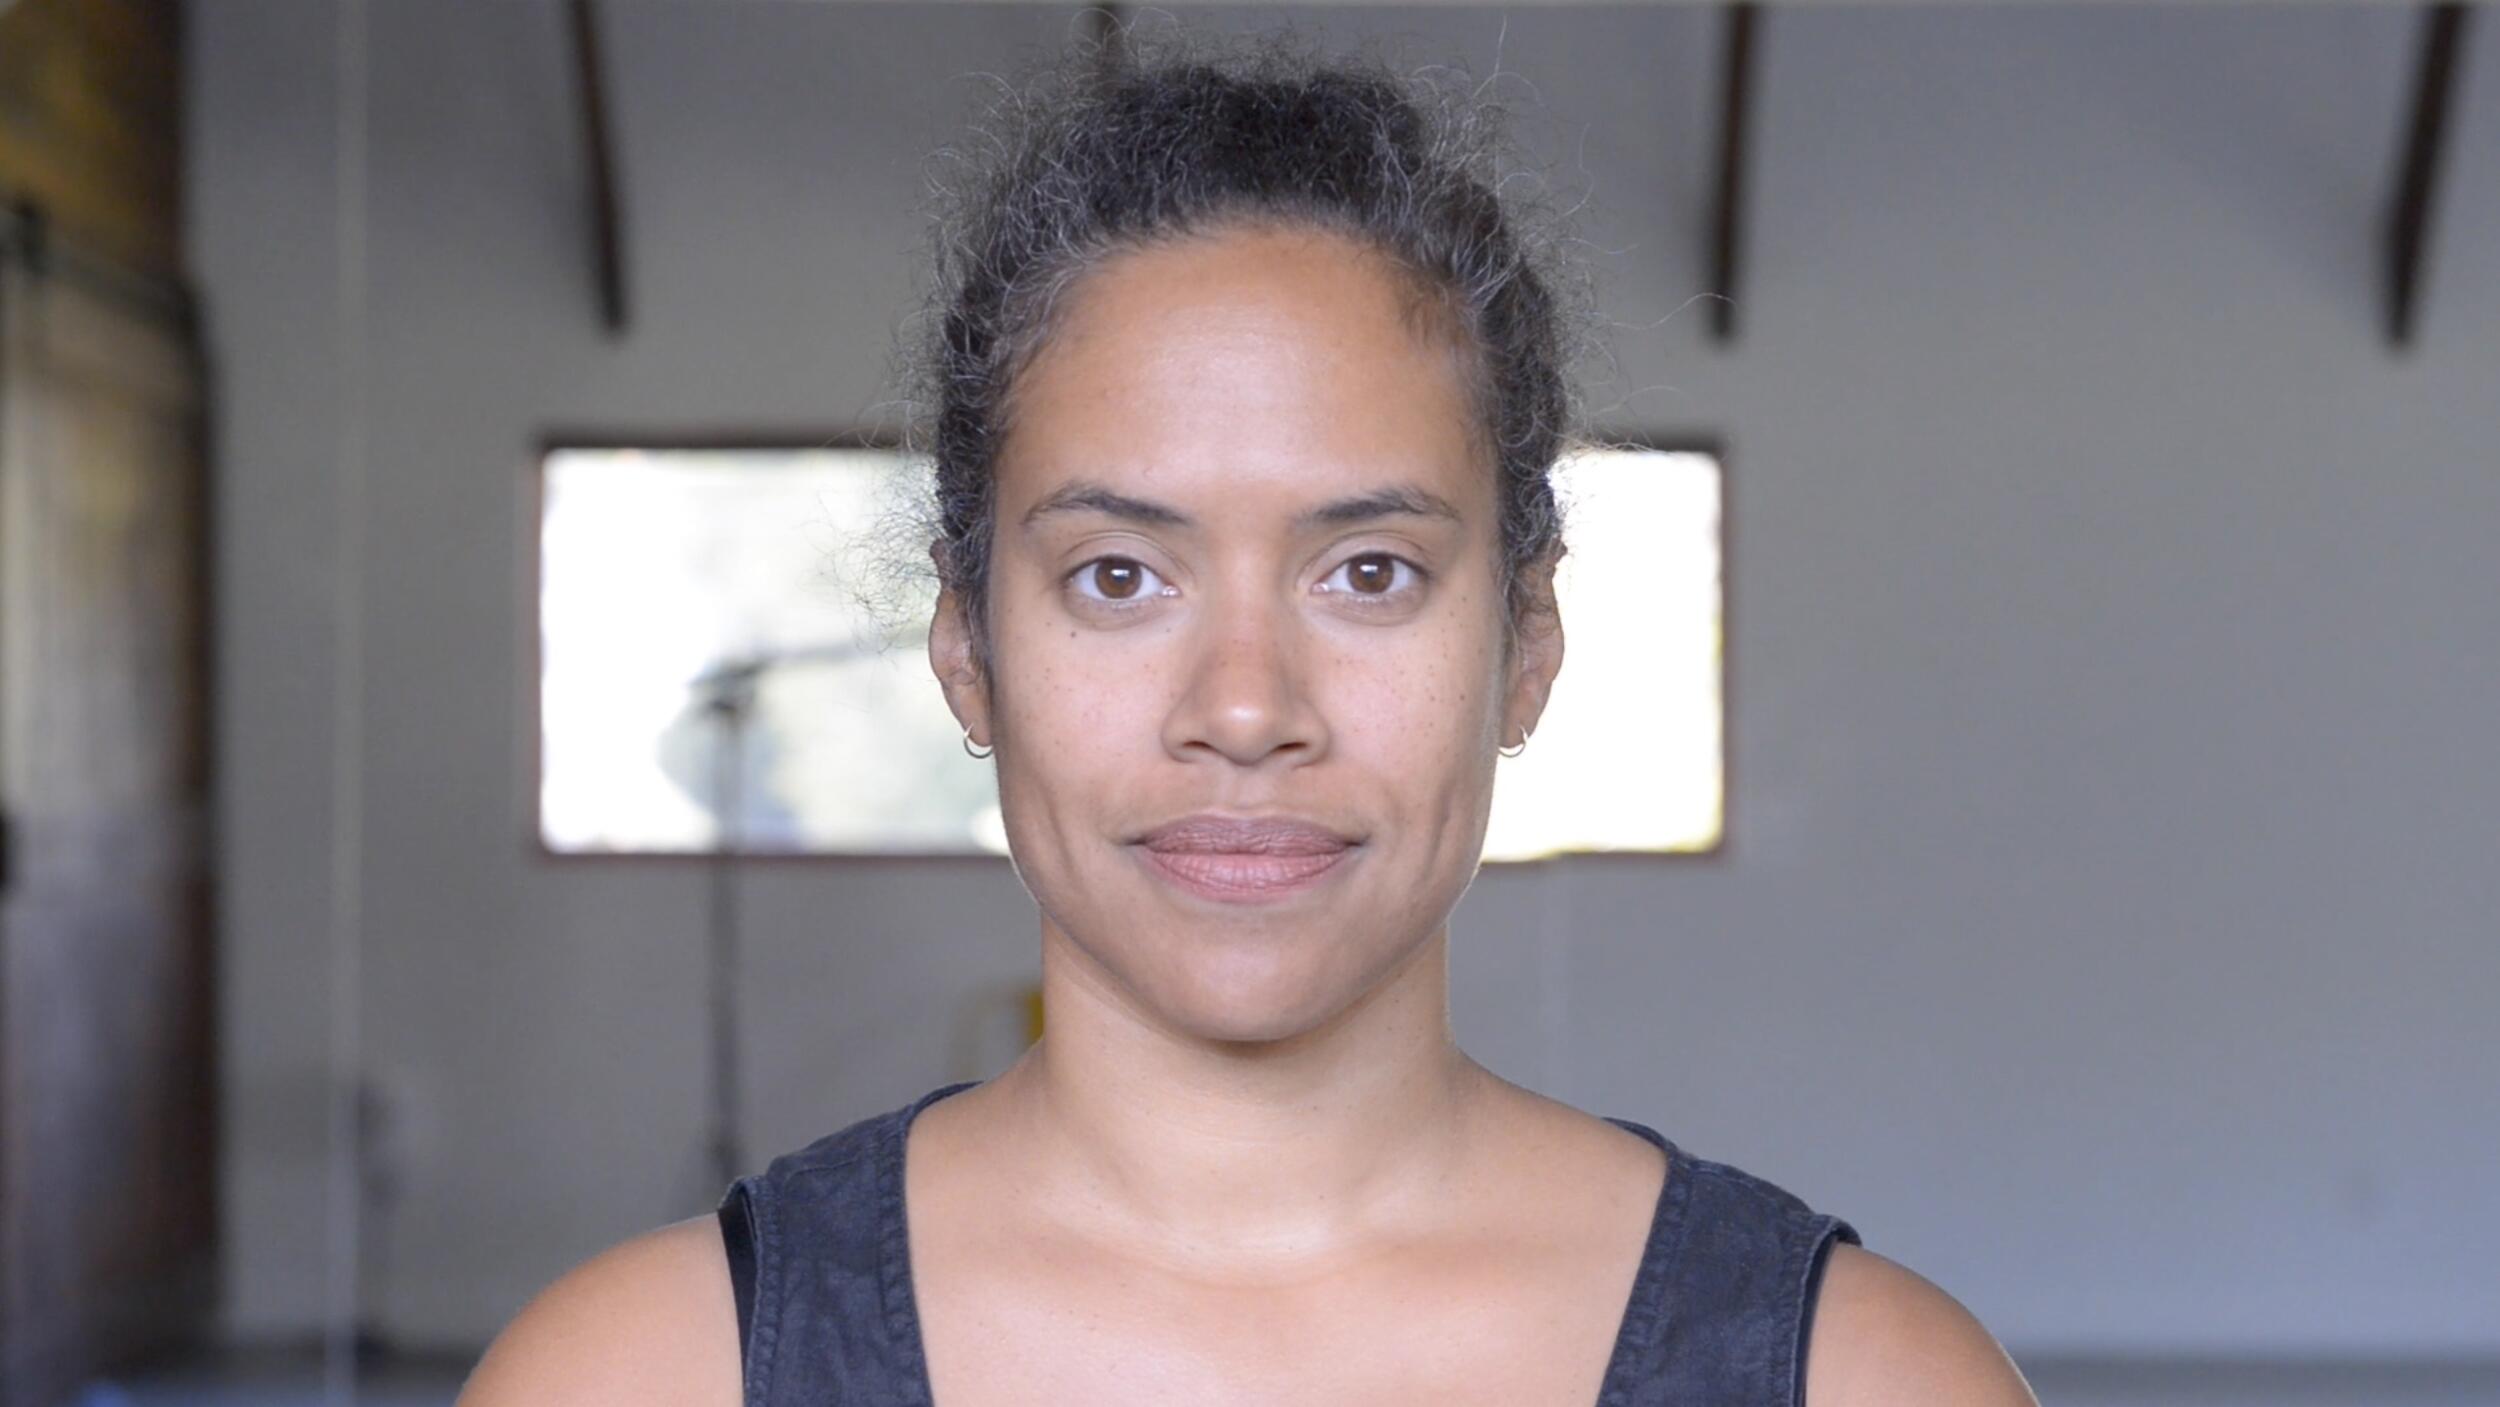 A video still portrait of a light-skinned black woman in a bright loft with salt and pepper disheveled hair pulled back, a slight smile, wearing a black tank top.